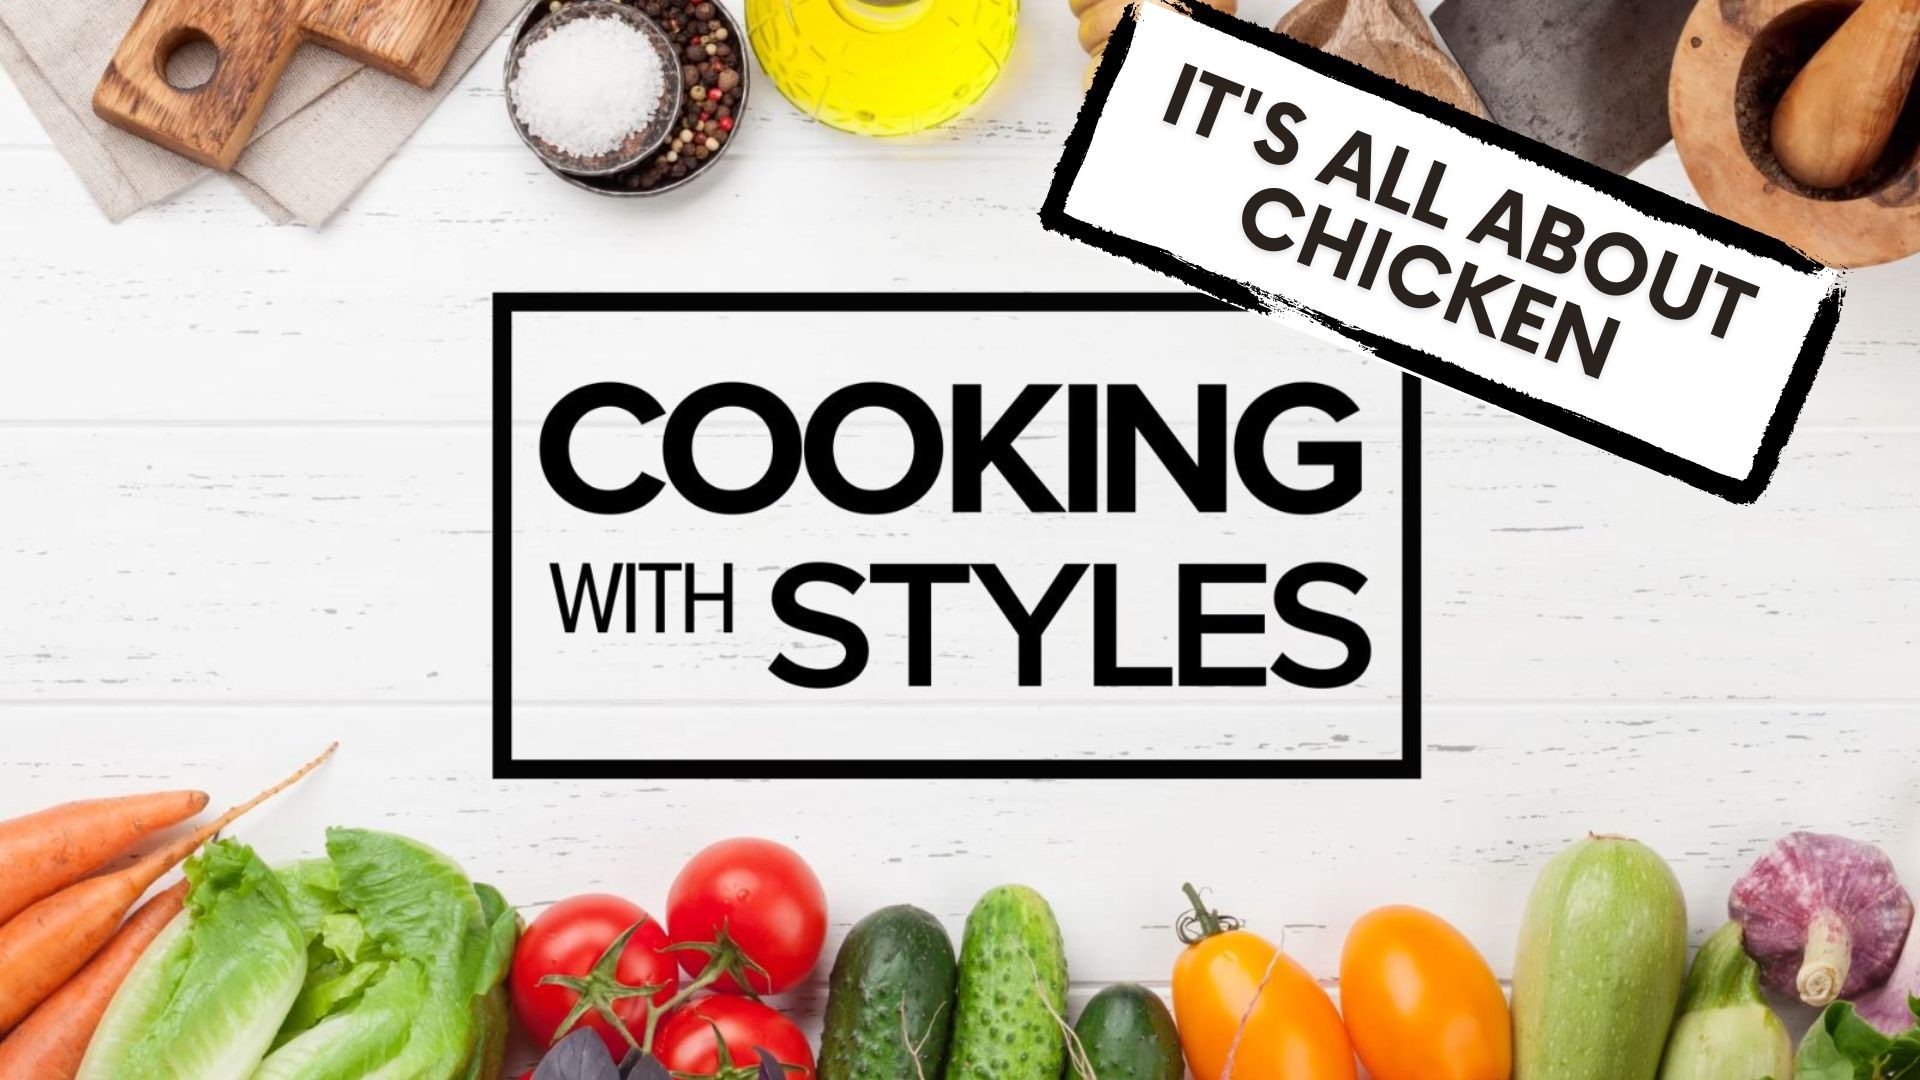 KFMB's Shawn Styles shares different recipes you can make with chicken. From chicken stroganoff to chicken noodle soup and buffalo tenders, he has something for all.